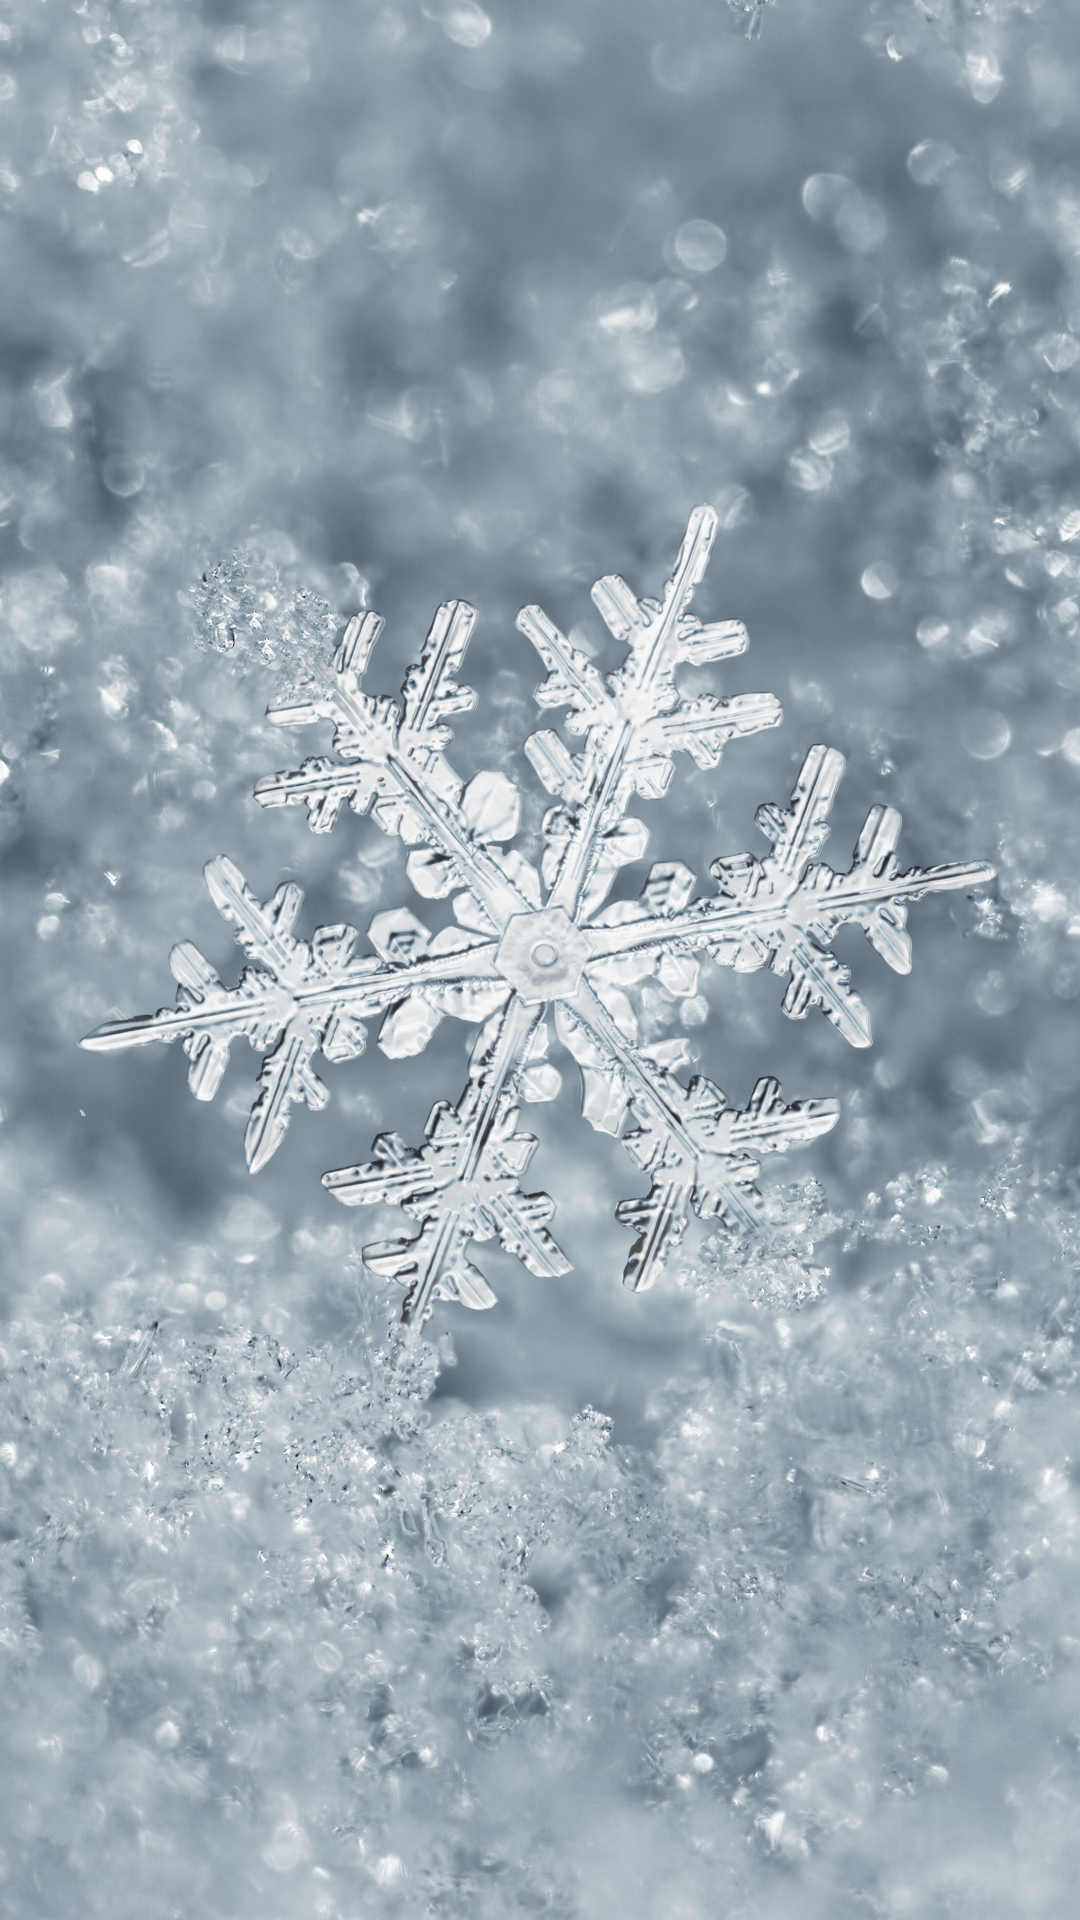 Discover more than 55 iphone winter wallpaper best - in.cdgdbentre